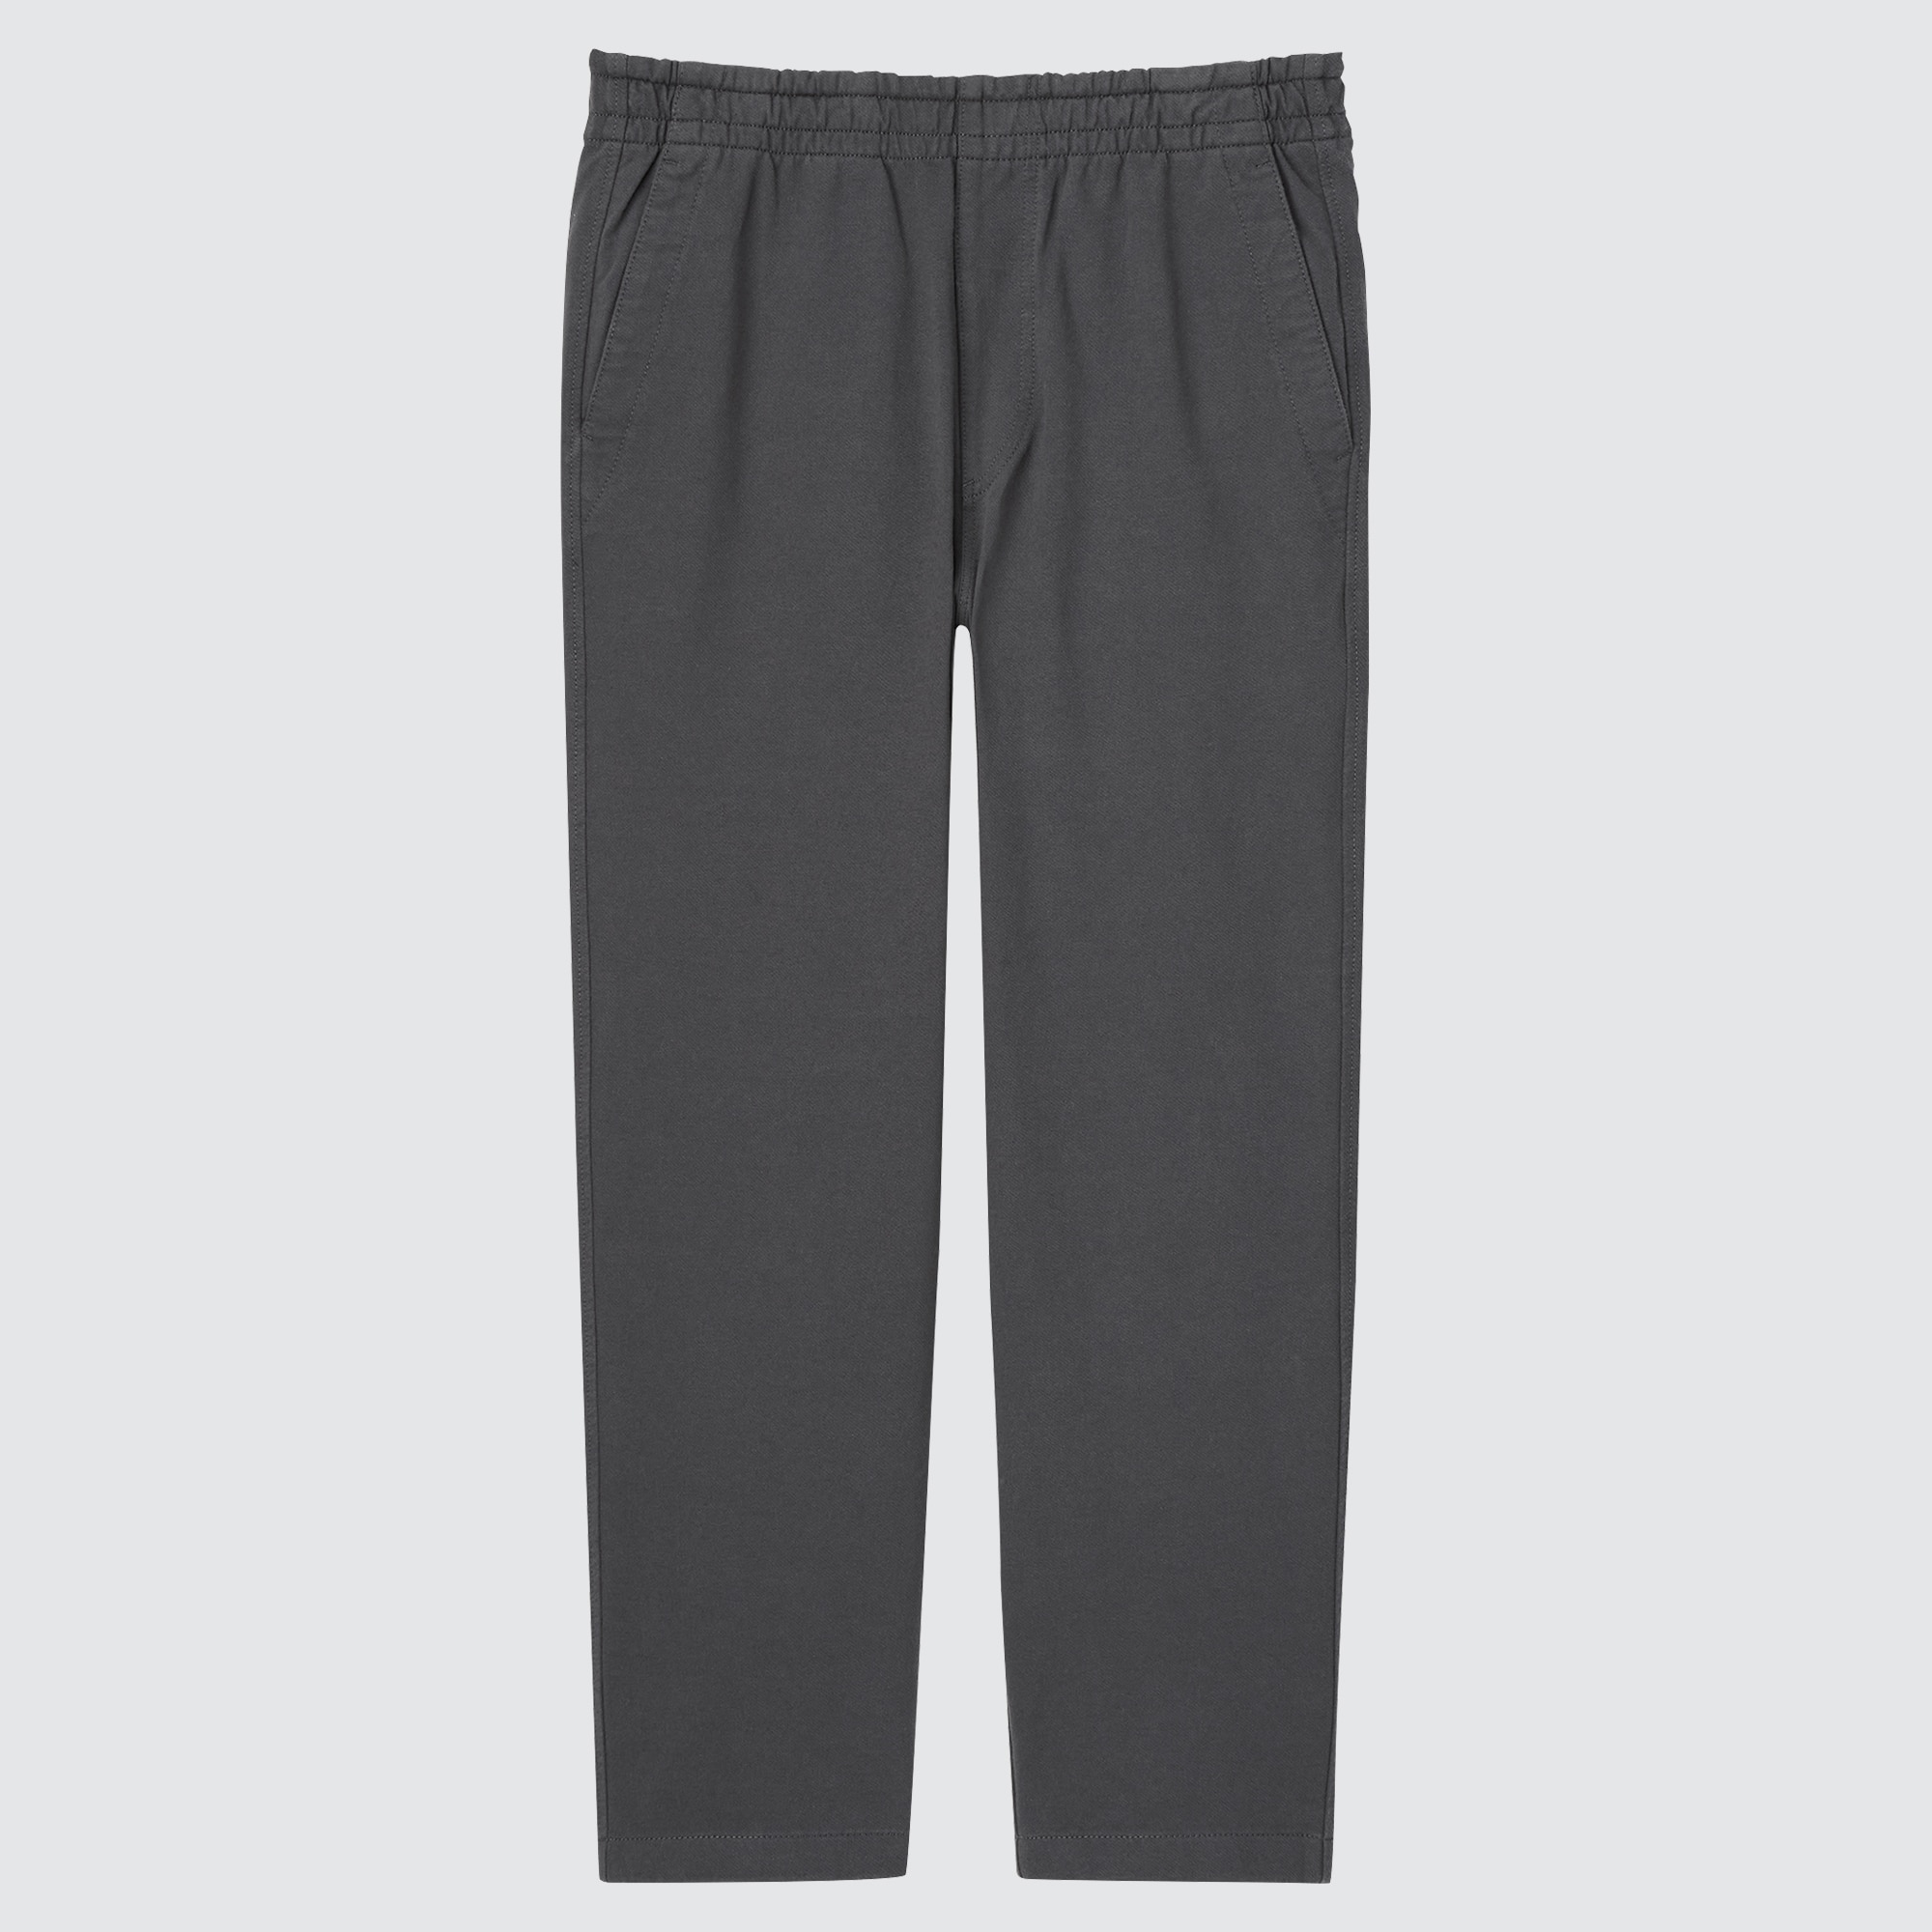 Top với hơn 62 jersey relaxed ankle pants uniqlo hay nhất  trieuson5